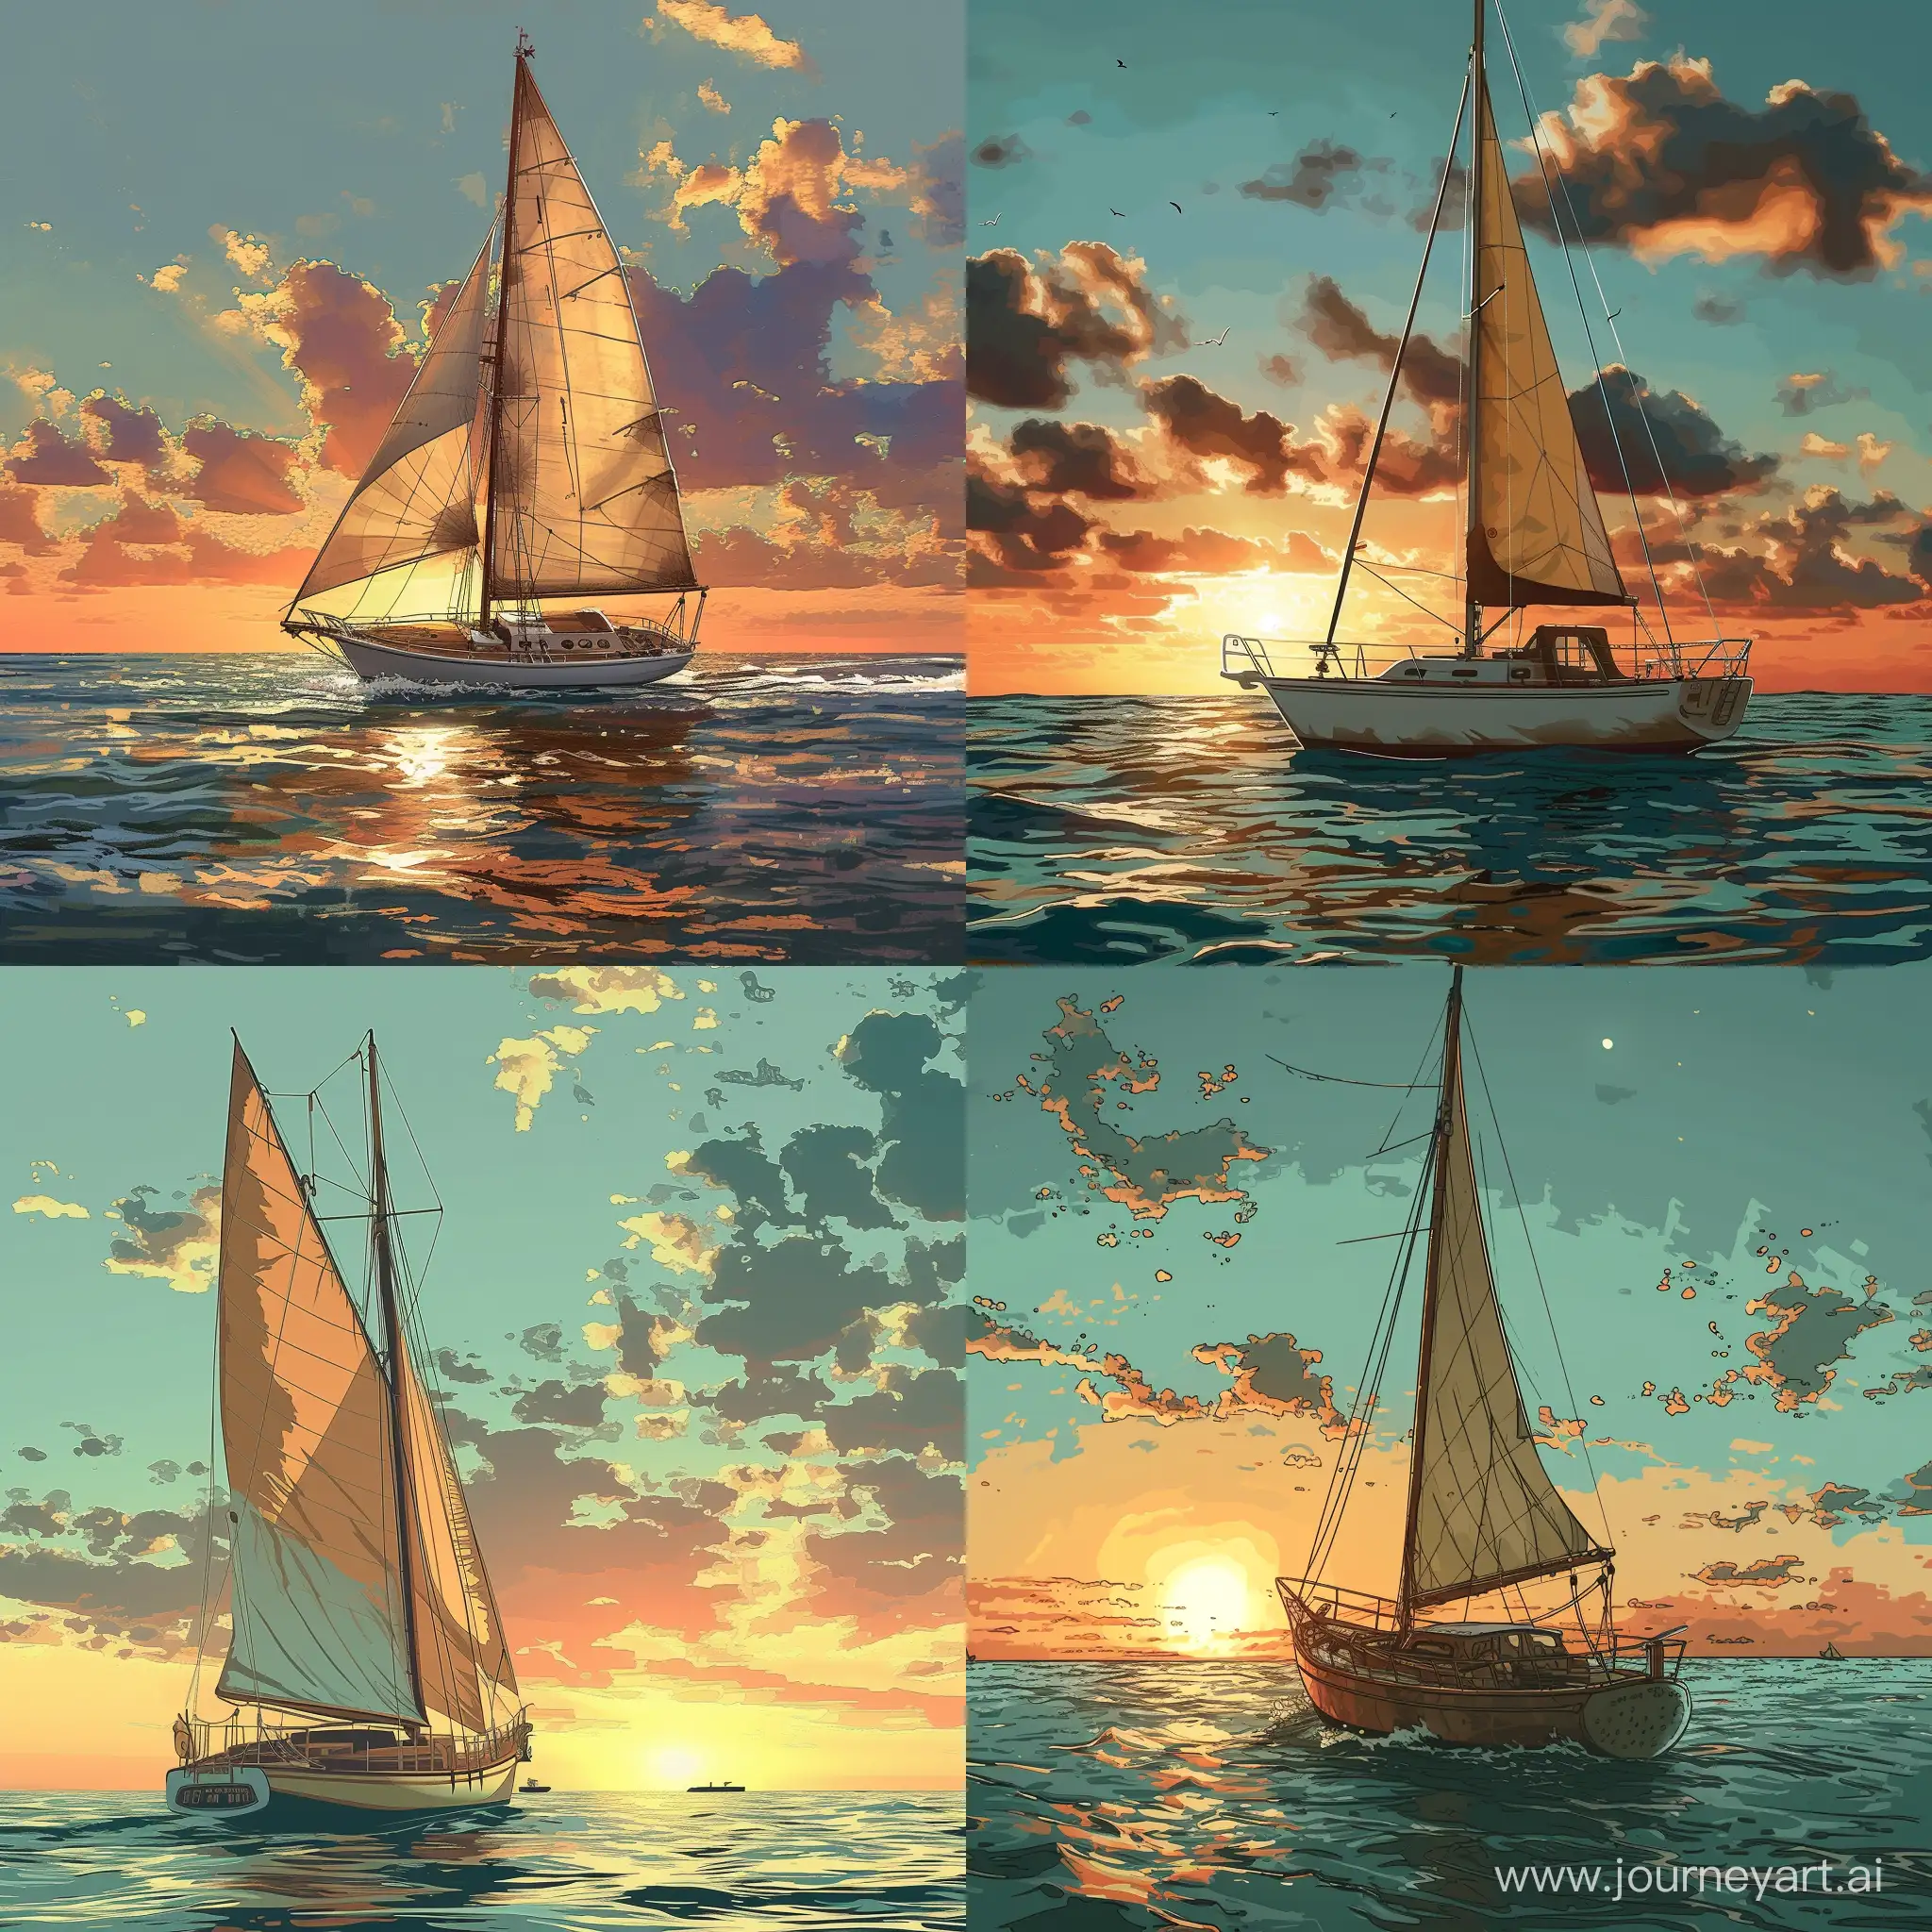 Romantic-Sunset-Sailboat-Illustration-in-Detailed-Style